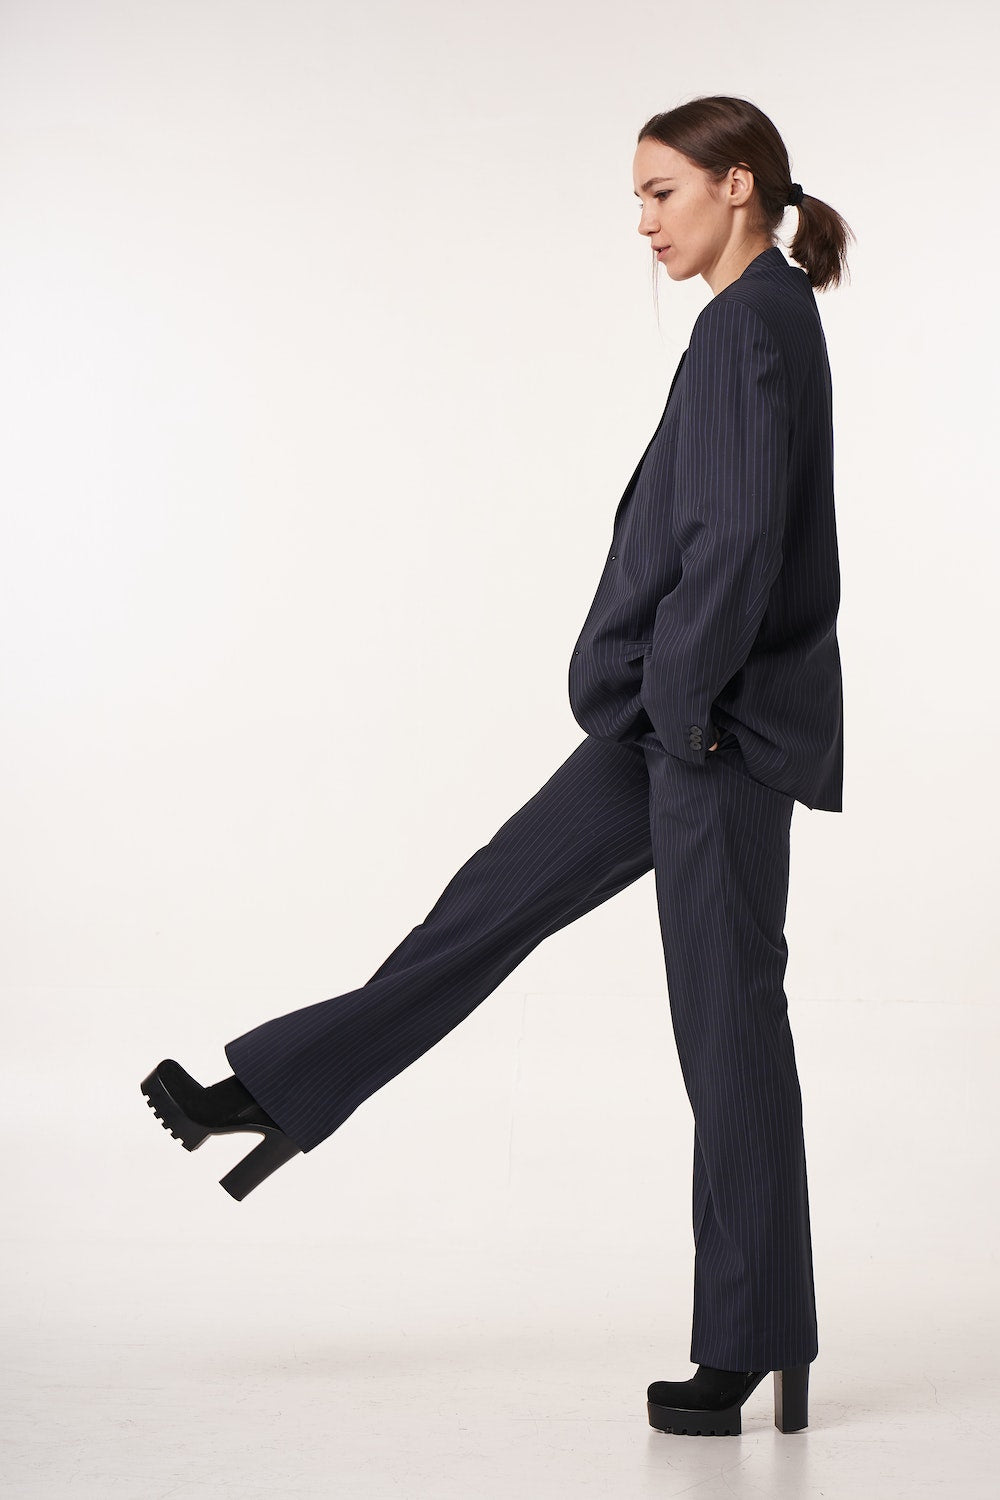 petite workwear suits